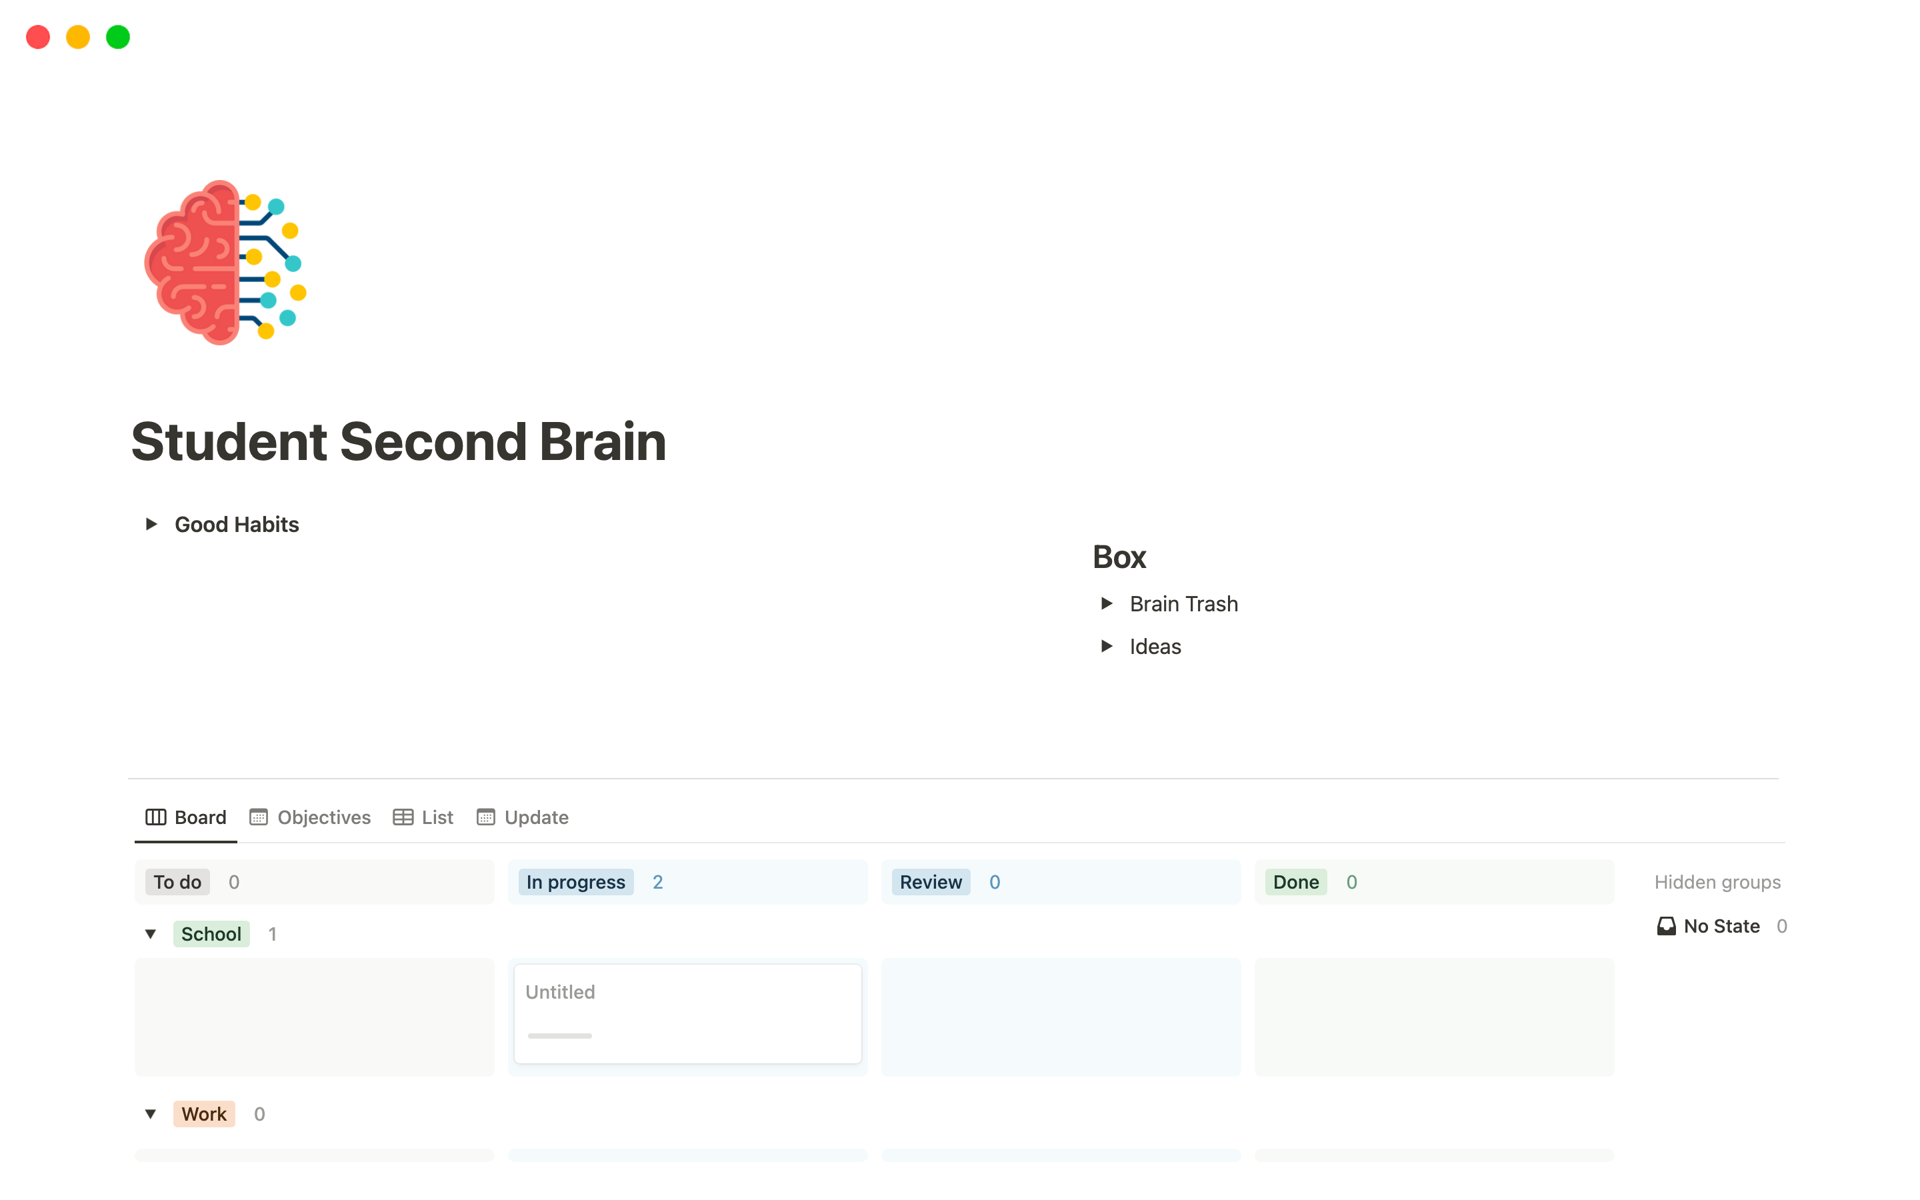 A second brain dashboard to track your activities and organize yourself.